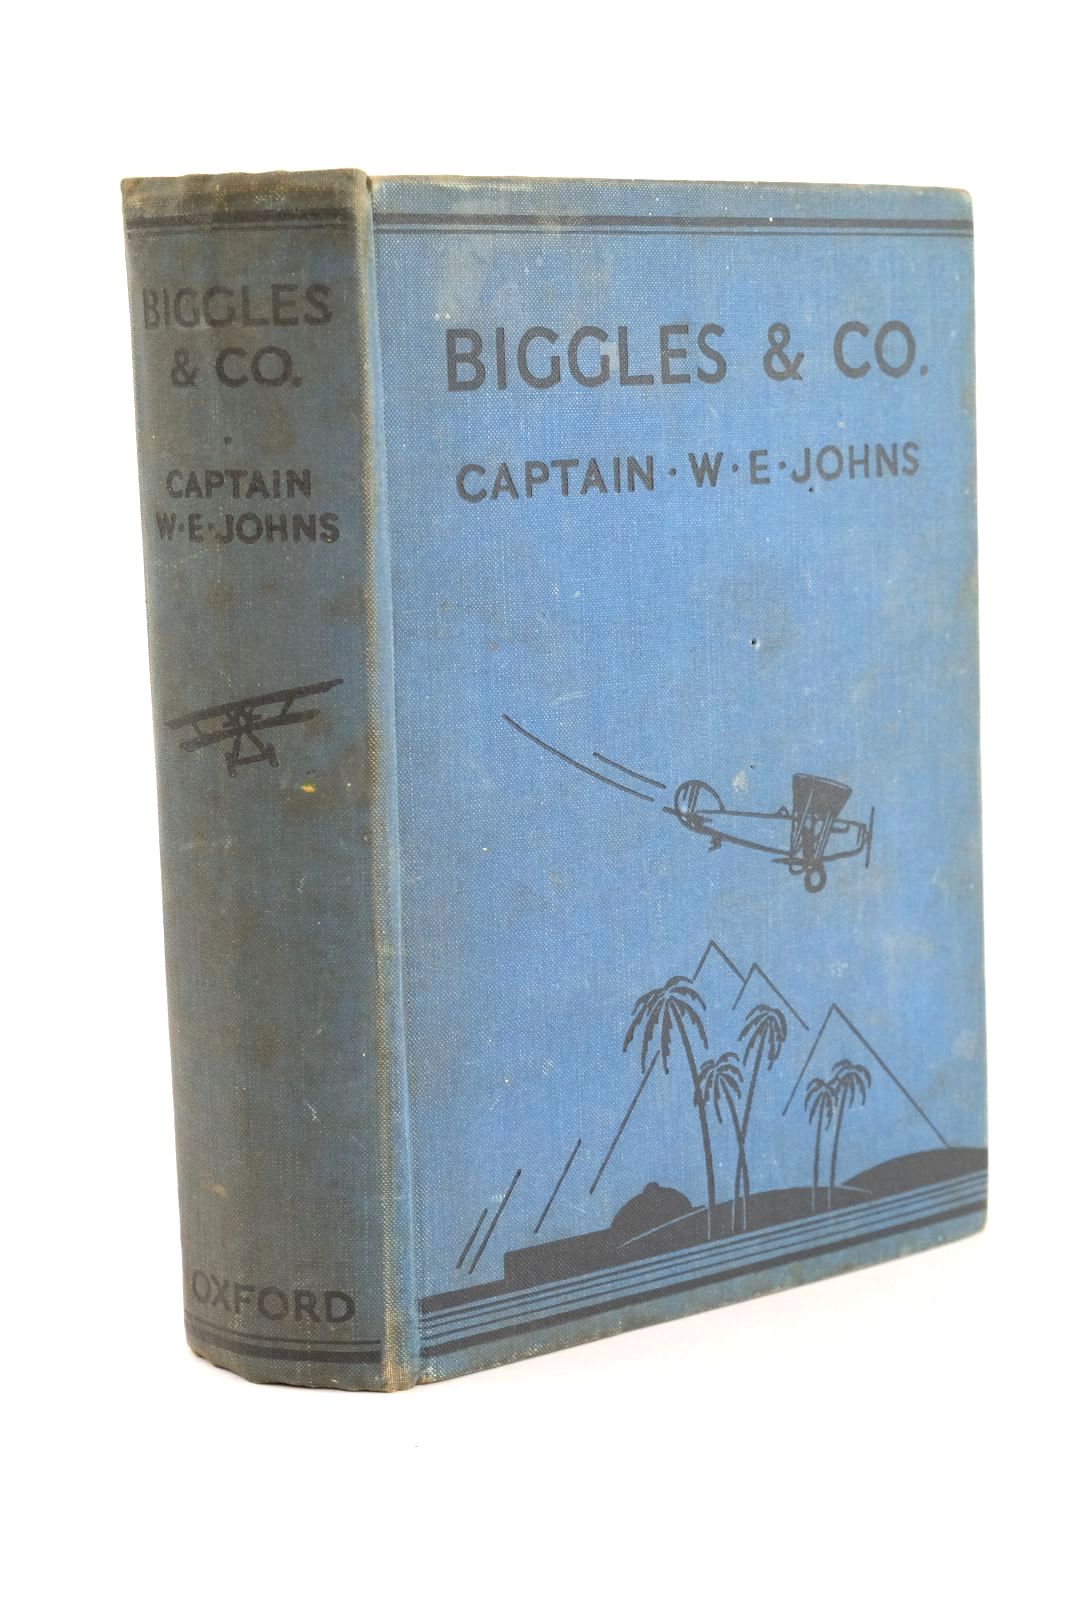 Photo of BIGGLES & CO.- Stock Number: 1323847